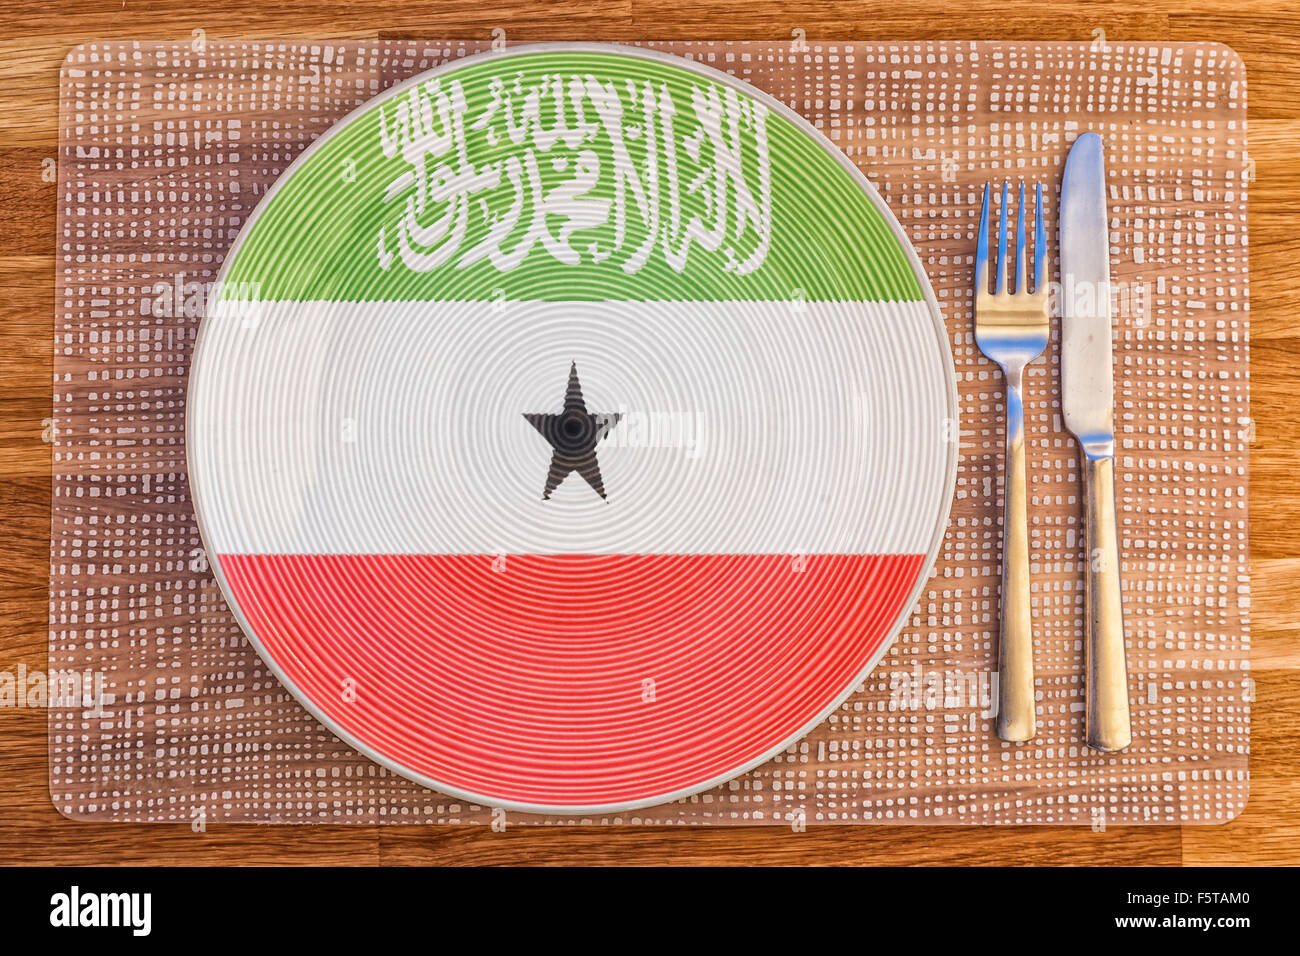 Dinner plate with the flag of Somaliland on it for your international food and drink concepts. Stock Photo